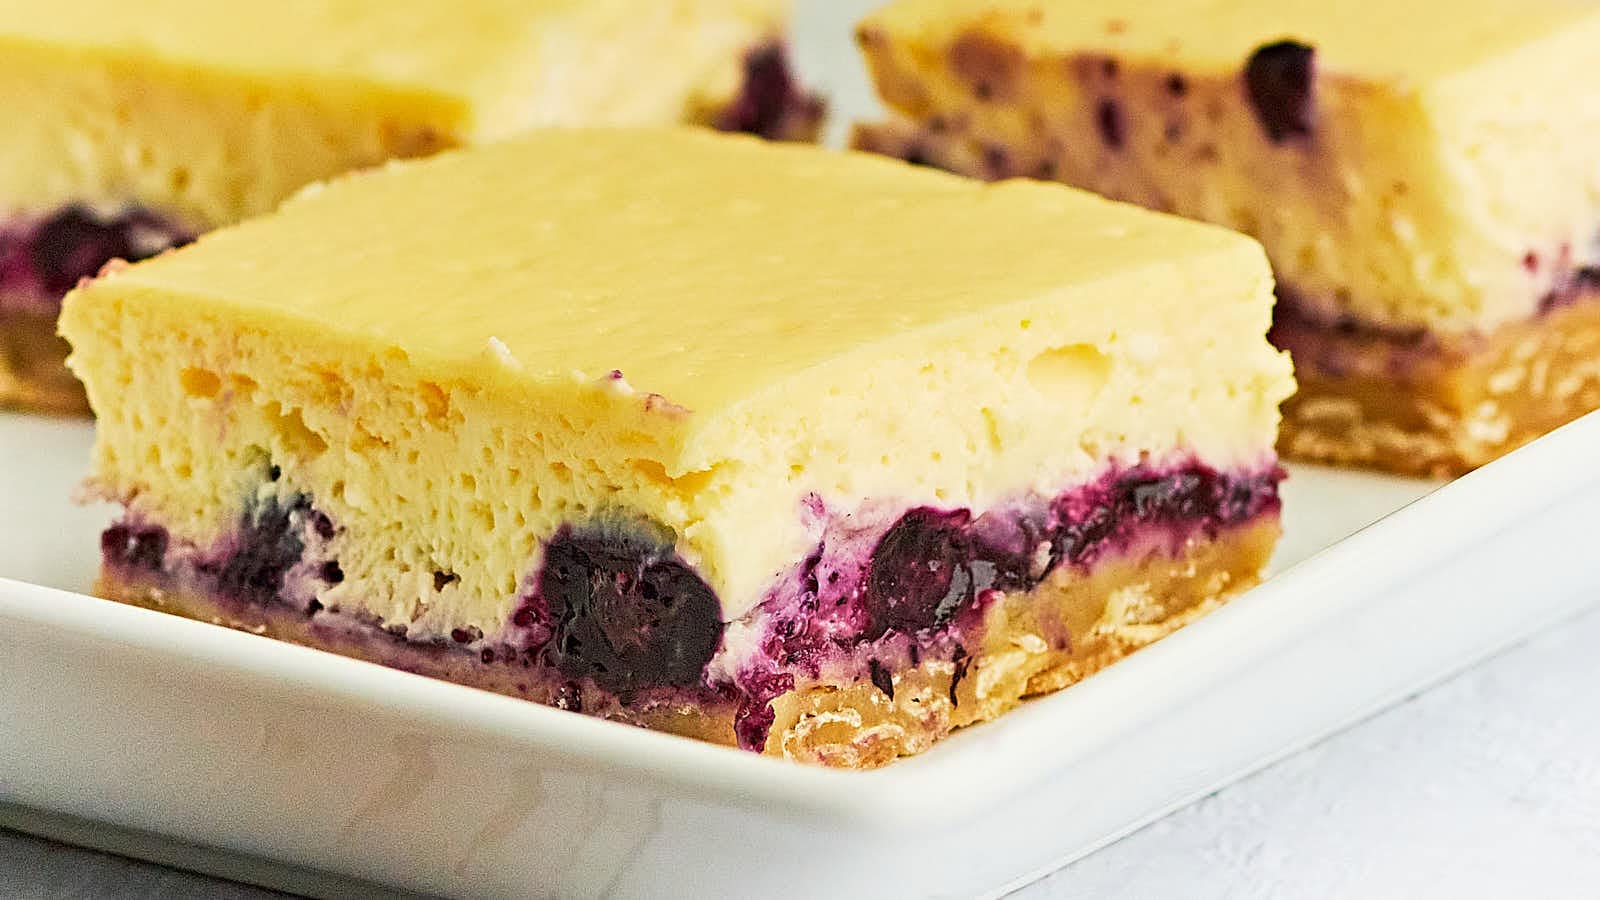 Blueberry Cheesecake Bars recipe by Cheerful Cook.